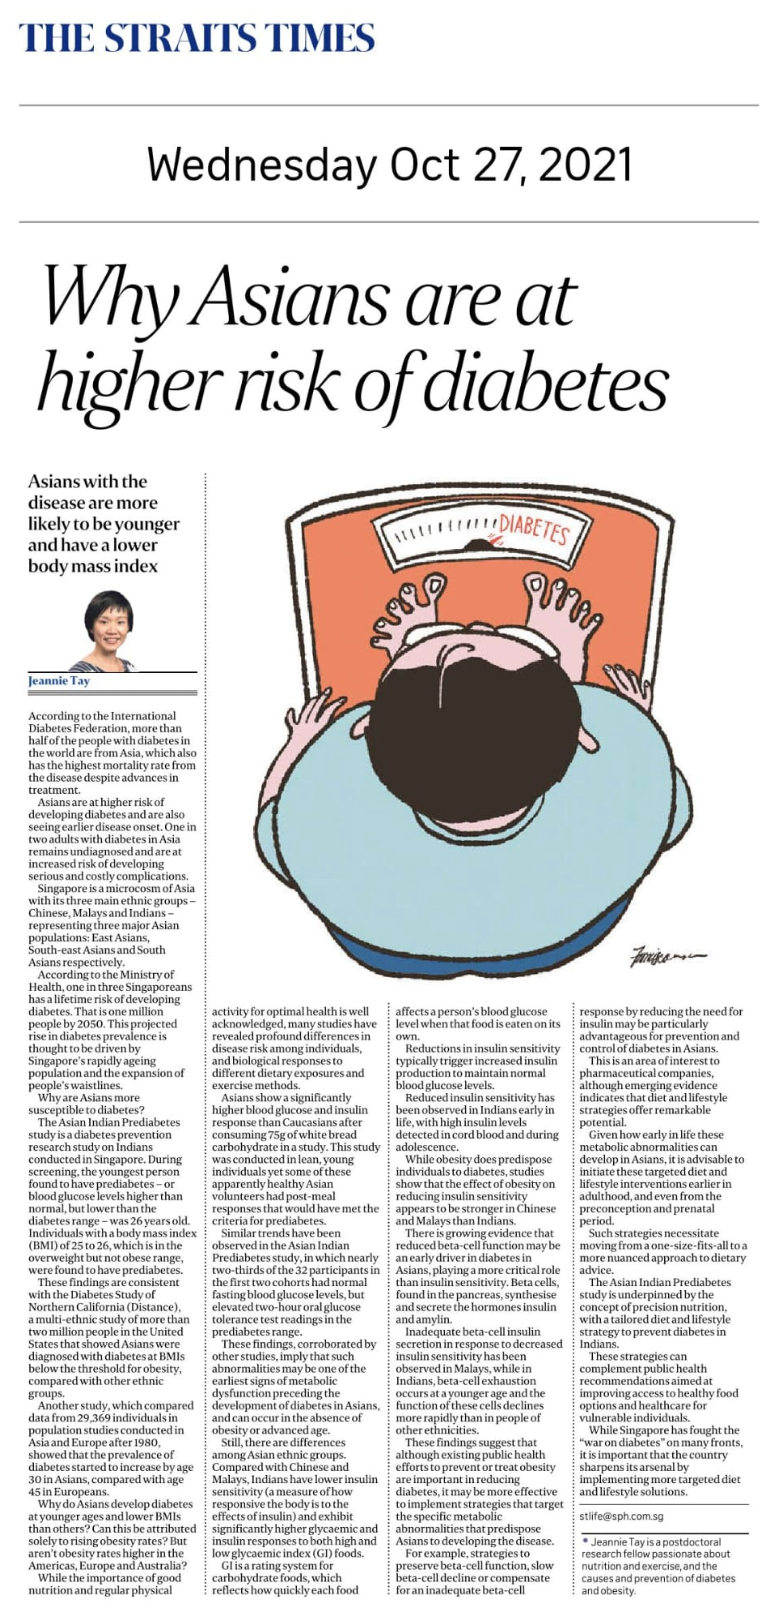 Why Asians Are At Higher Risk of Diabetes - Published in The Straits Times Oct 27, 2021